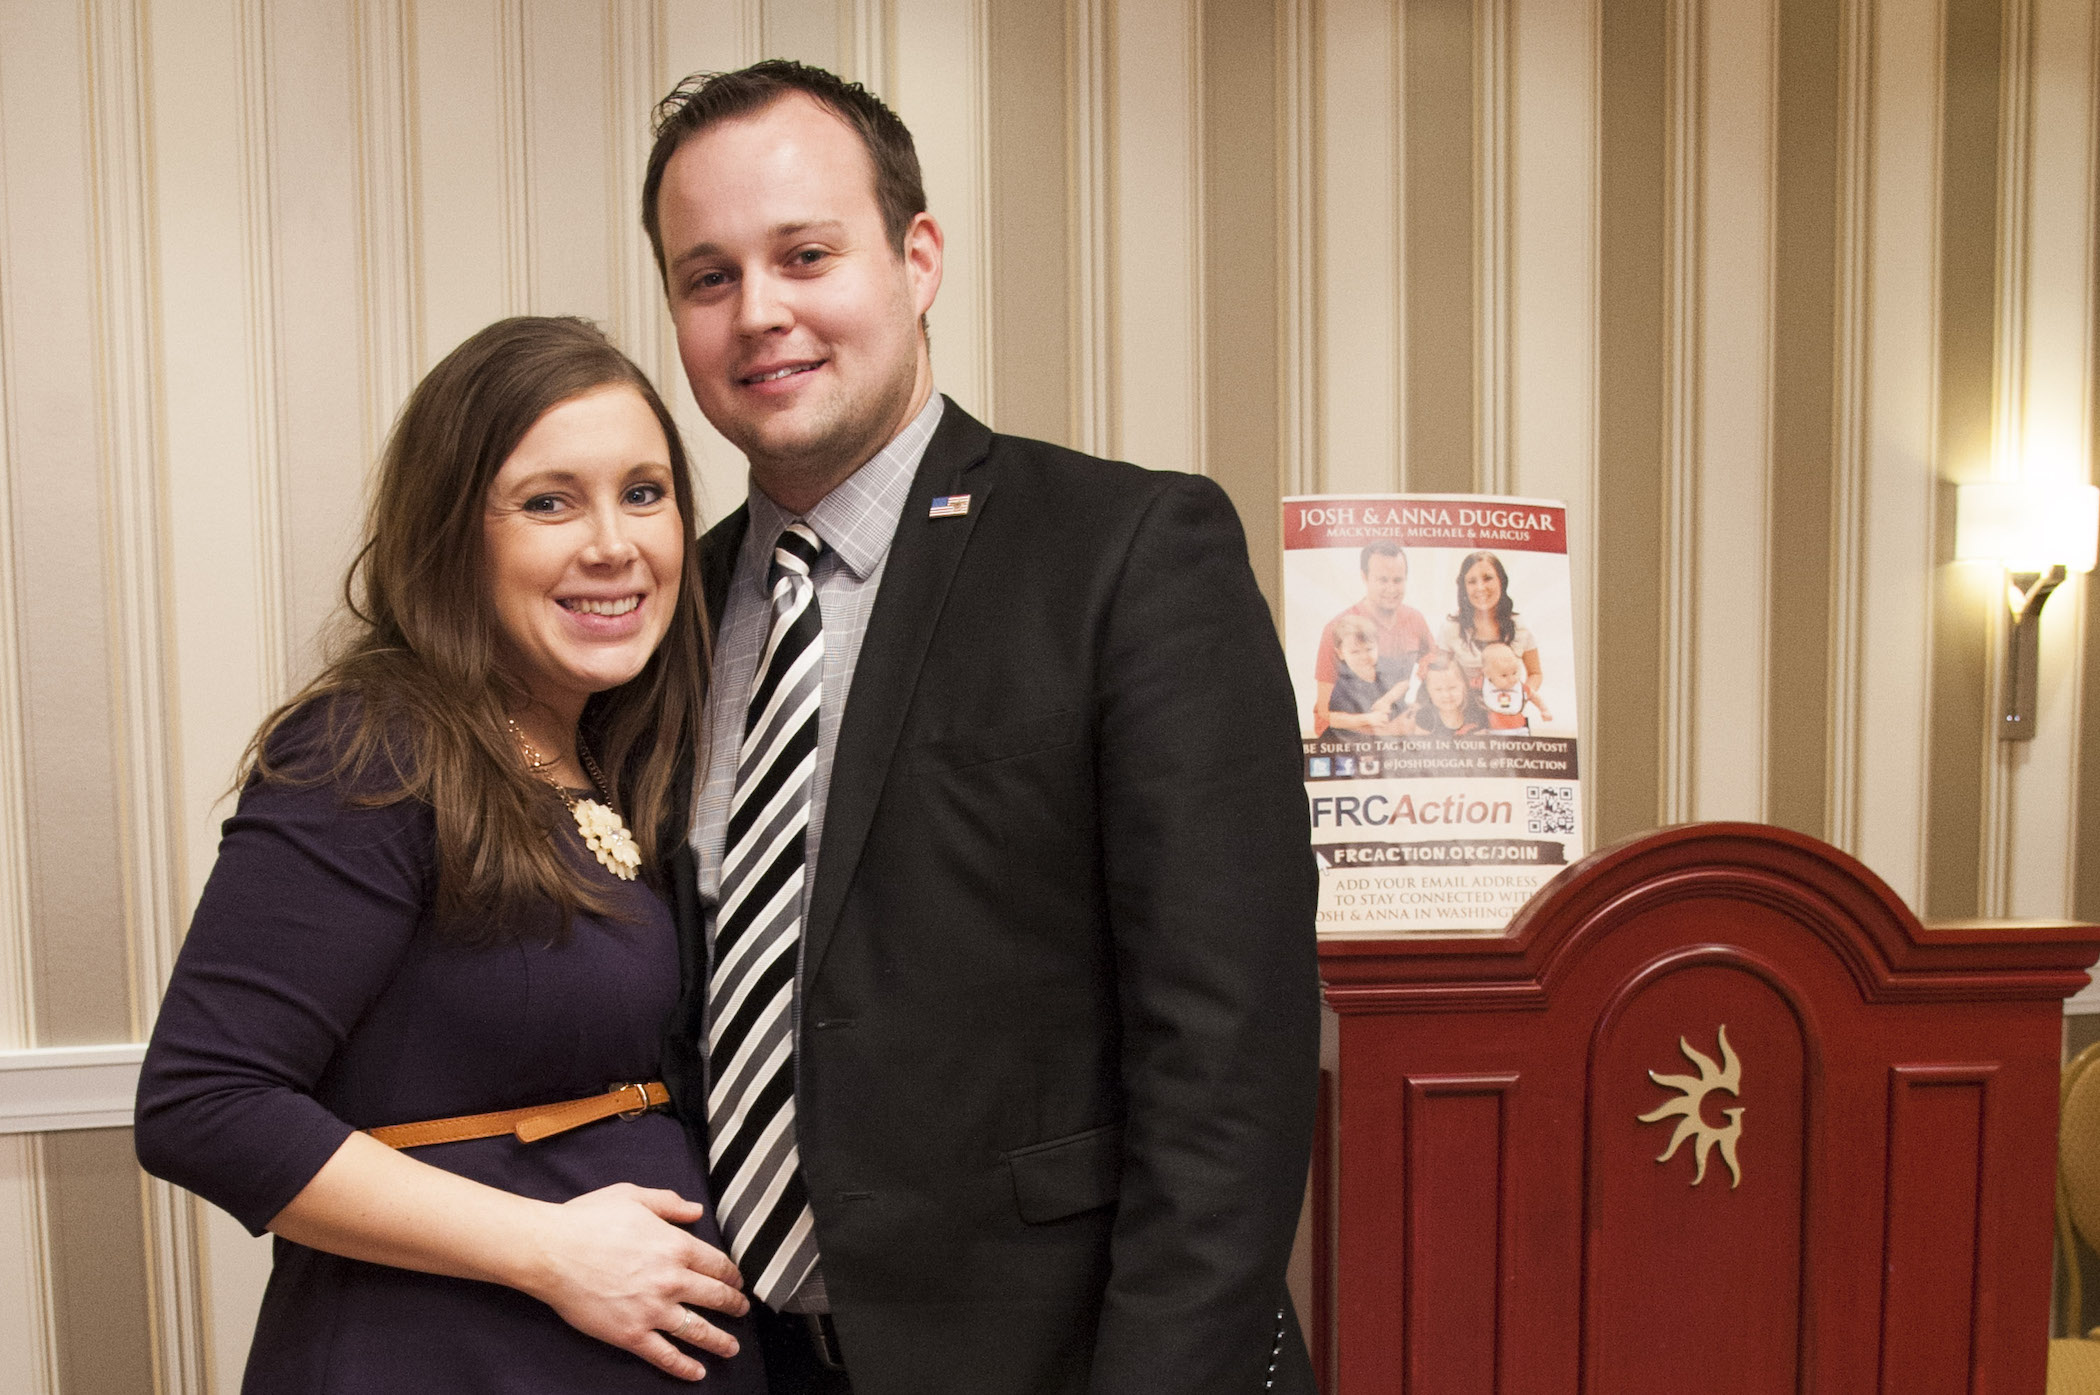 Anna Duggar and Josh Duggar standing next to each other and smiling